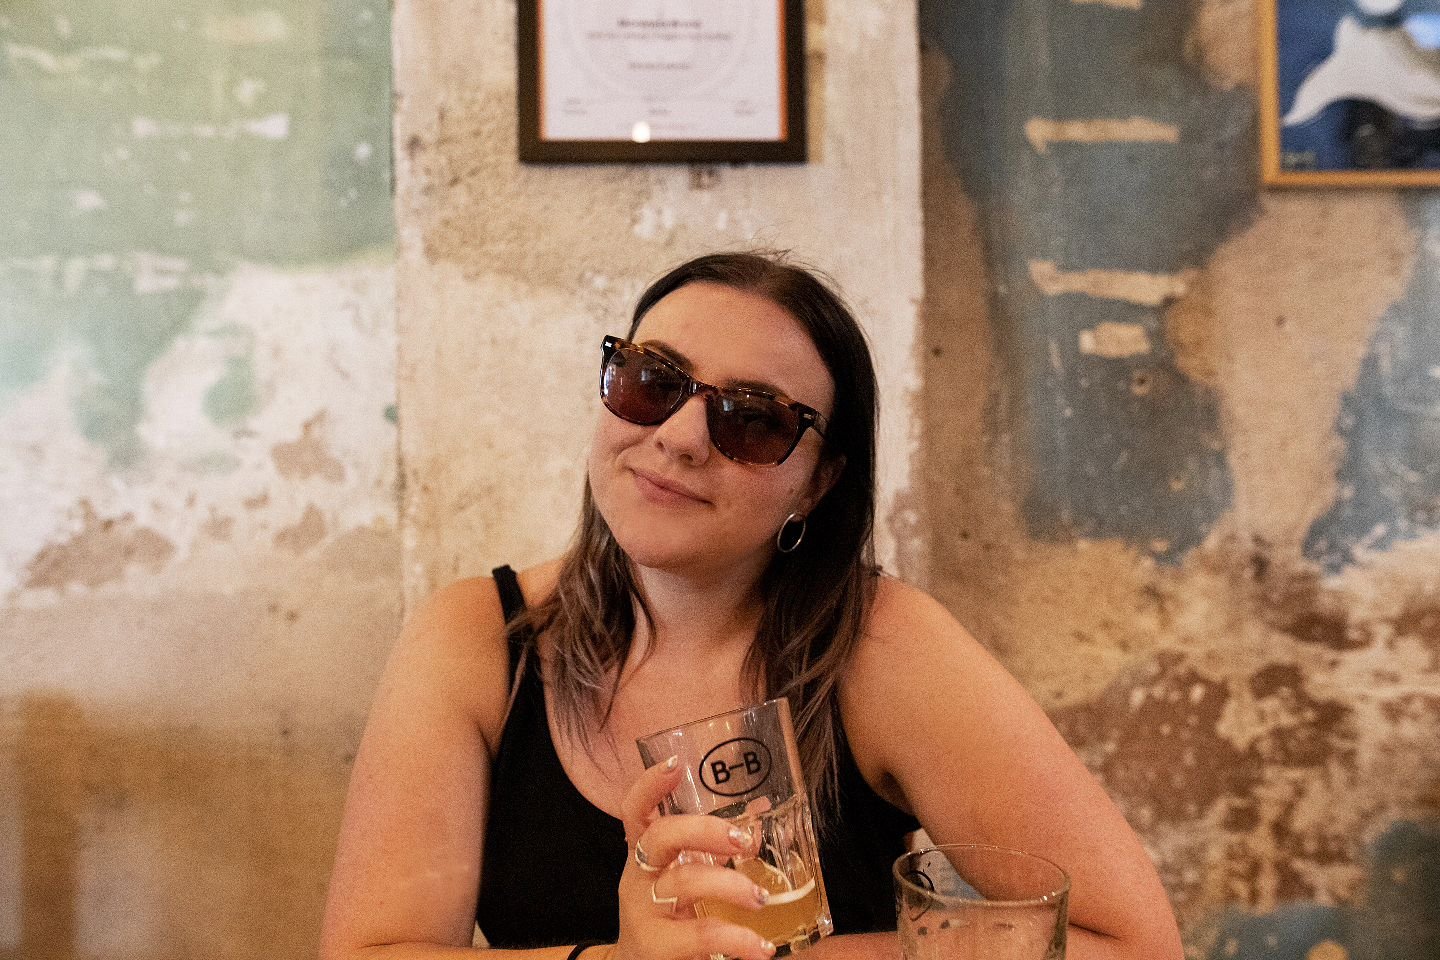 🖤 HIYA BUTT 🖤

Ola to all my new followers! Here's me, on holiday in Barcelona with a bloody good beer! I do love a good ale... and so do most of my Butties!

Want to know if you're a Butty? 
Here's what a Butty couple sound like...

🖤 You don't t